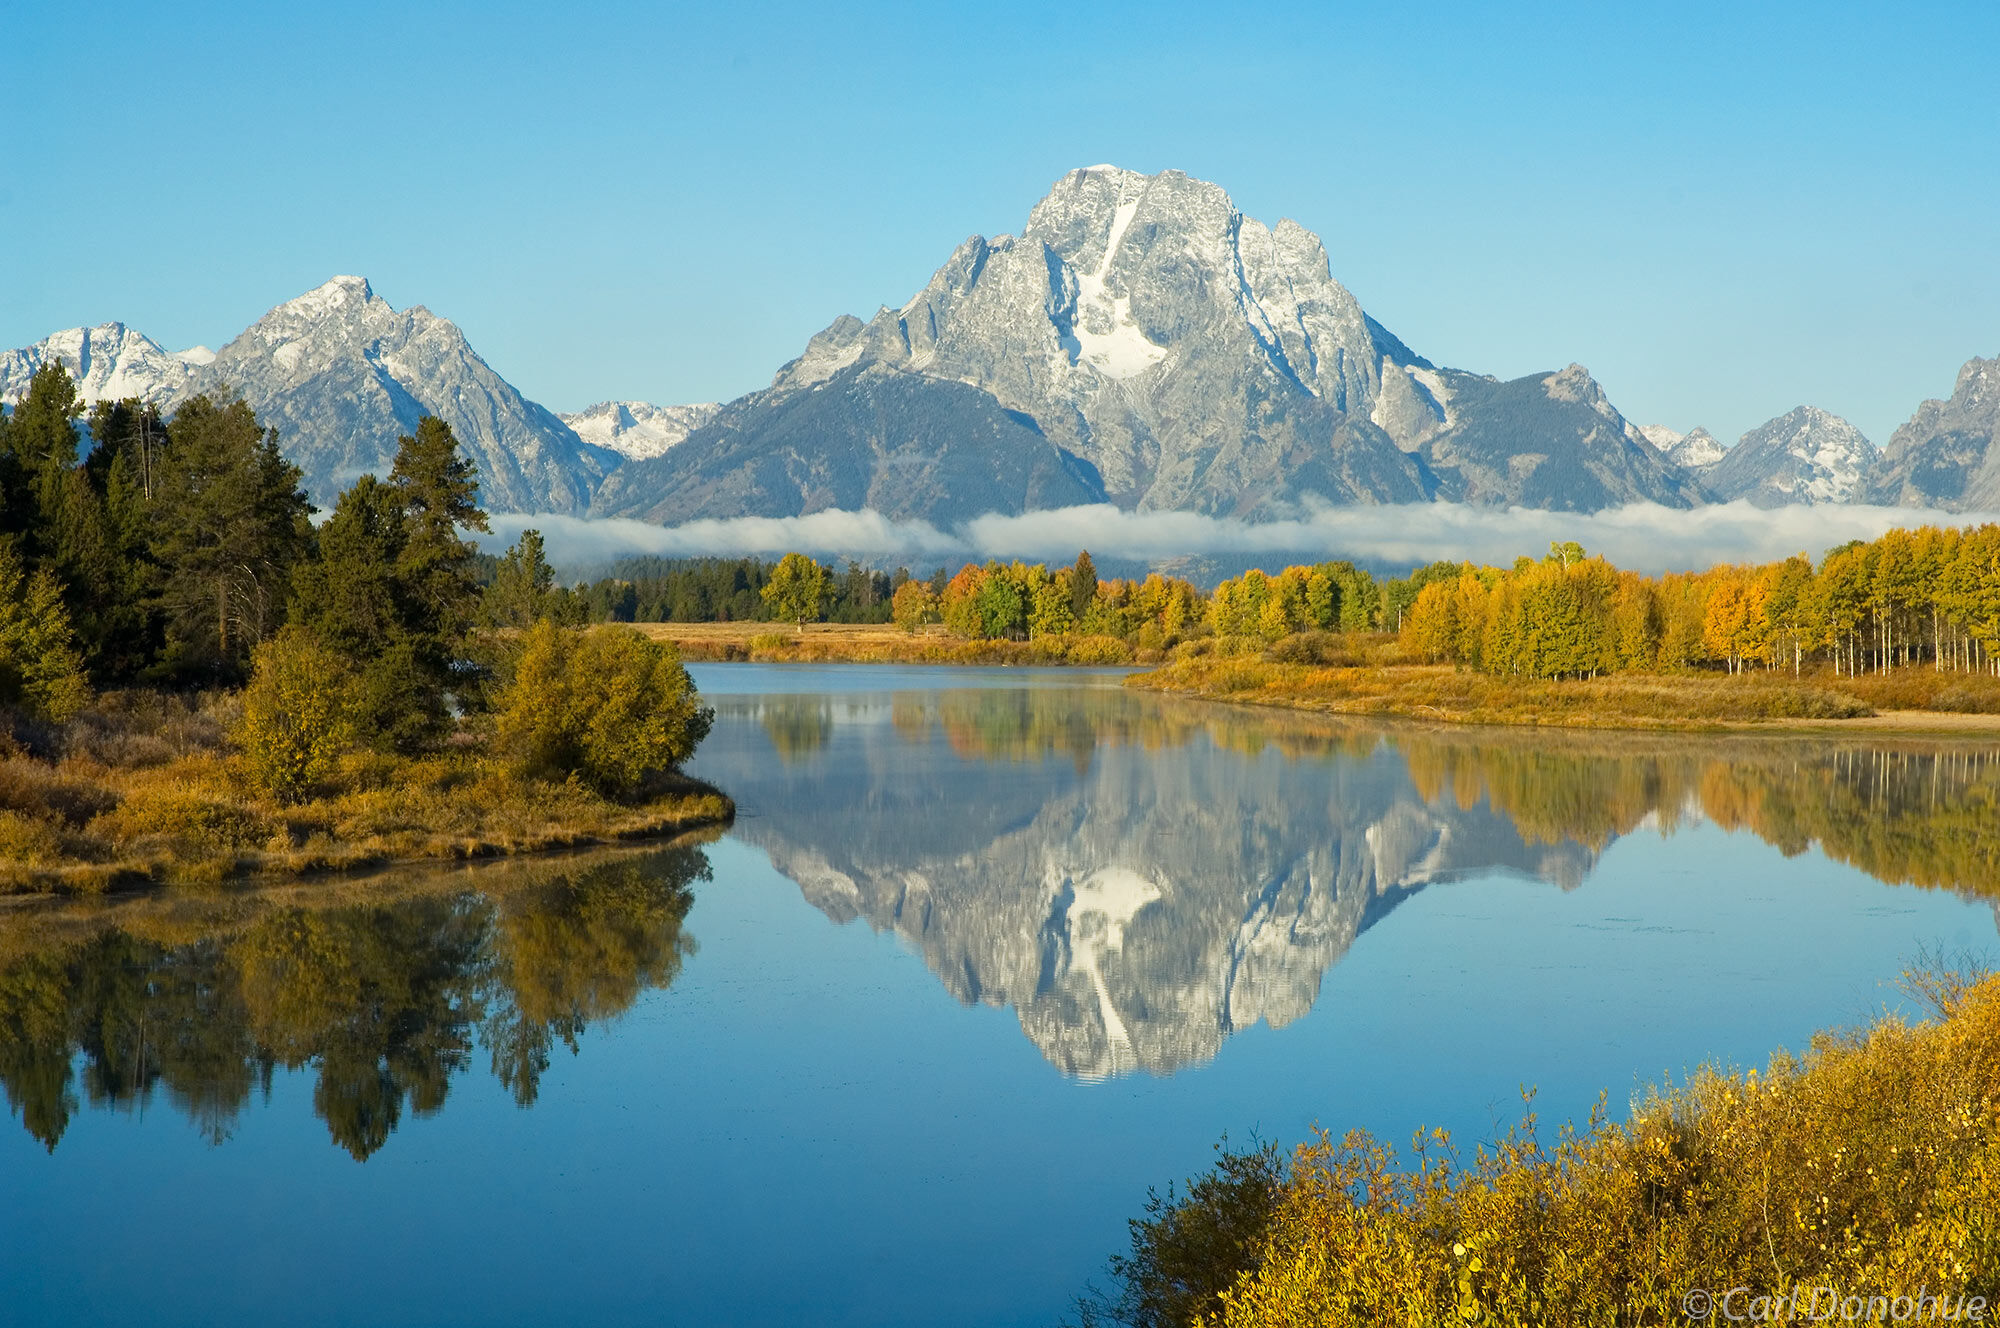 Oxbow Bend, just off highway 89/191 between Jackson Lake Junction and Moran Junction is a popular overlook. An oxbow is a crescent...